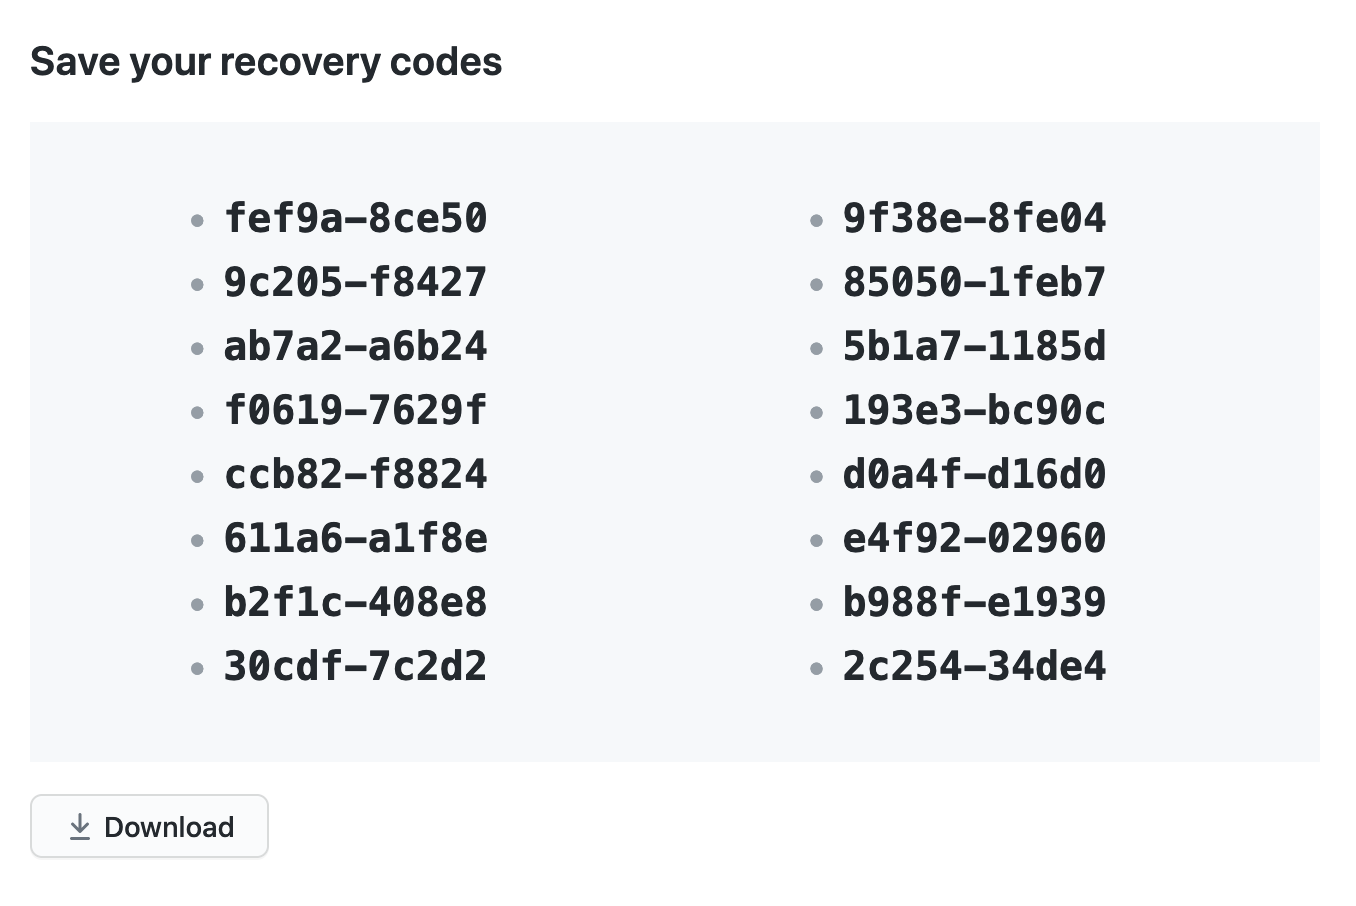 List of recovery codes to download